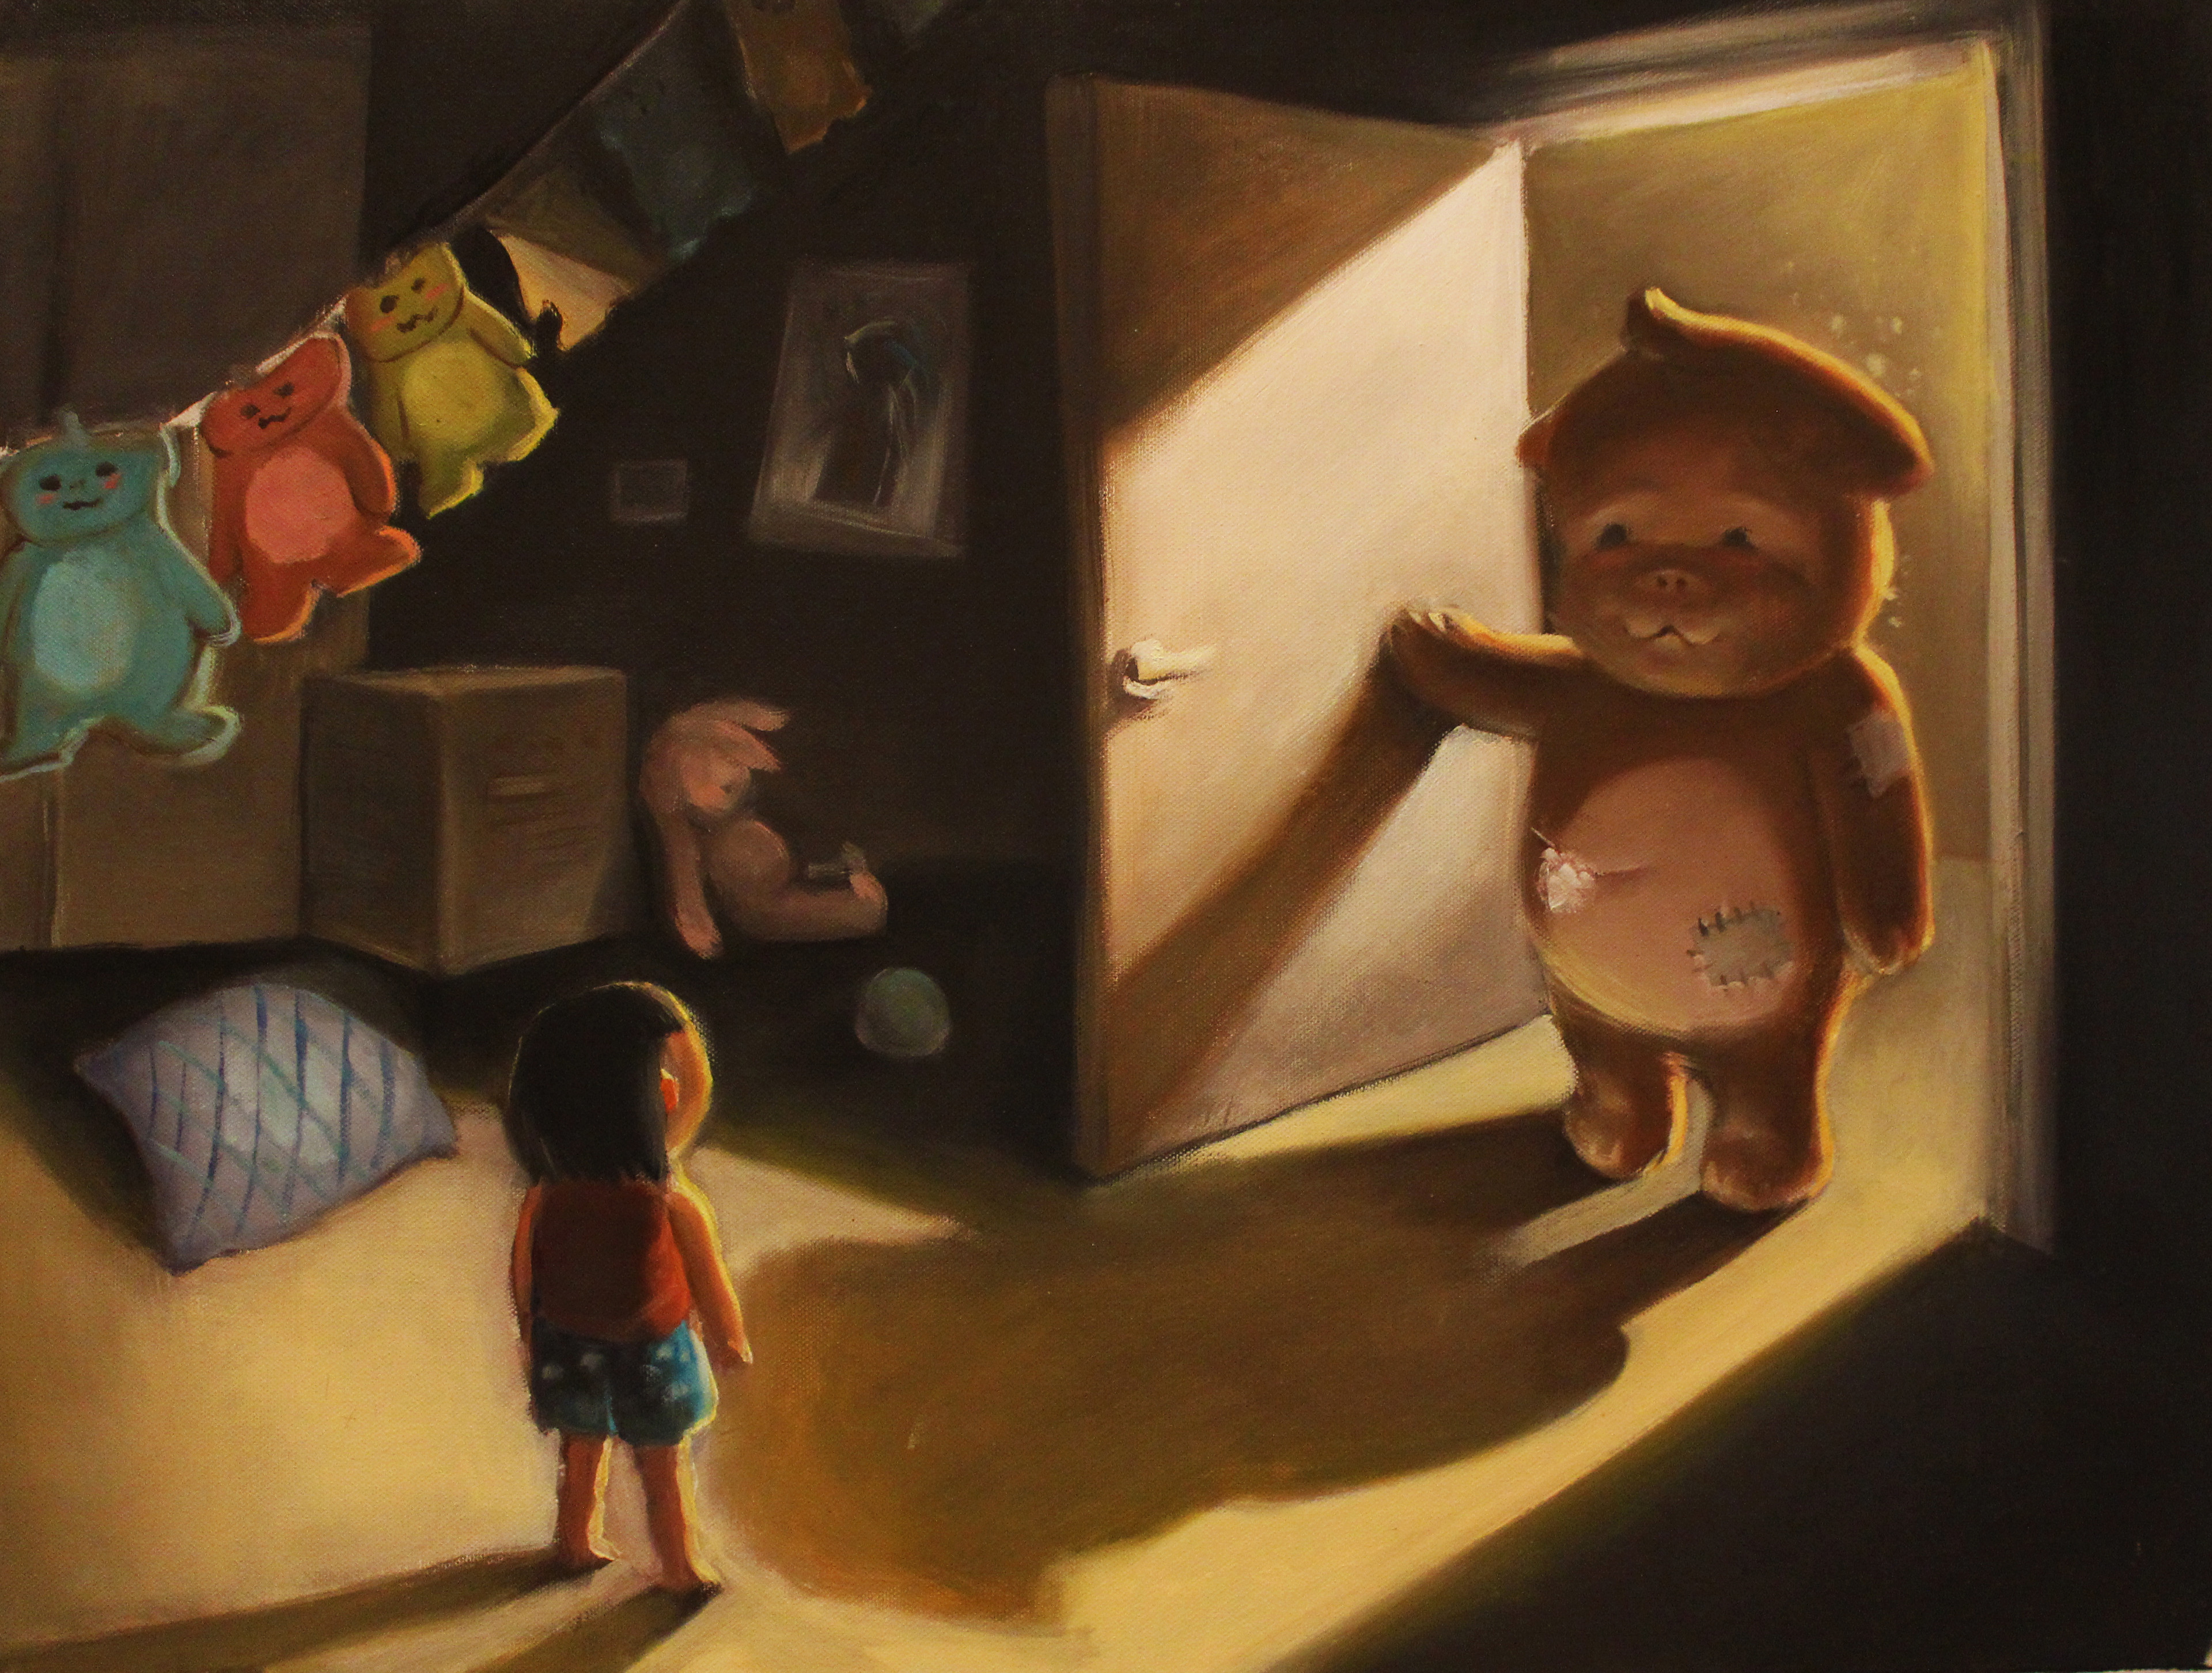 The Return
This is a lovely story of a little girl meets her lost tedday bear after many years. Oil on canvas 18x24